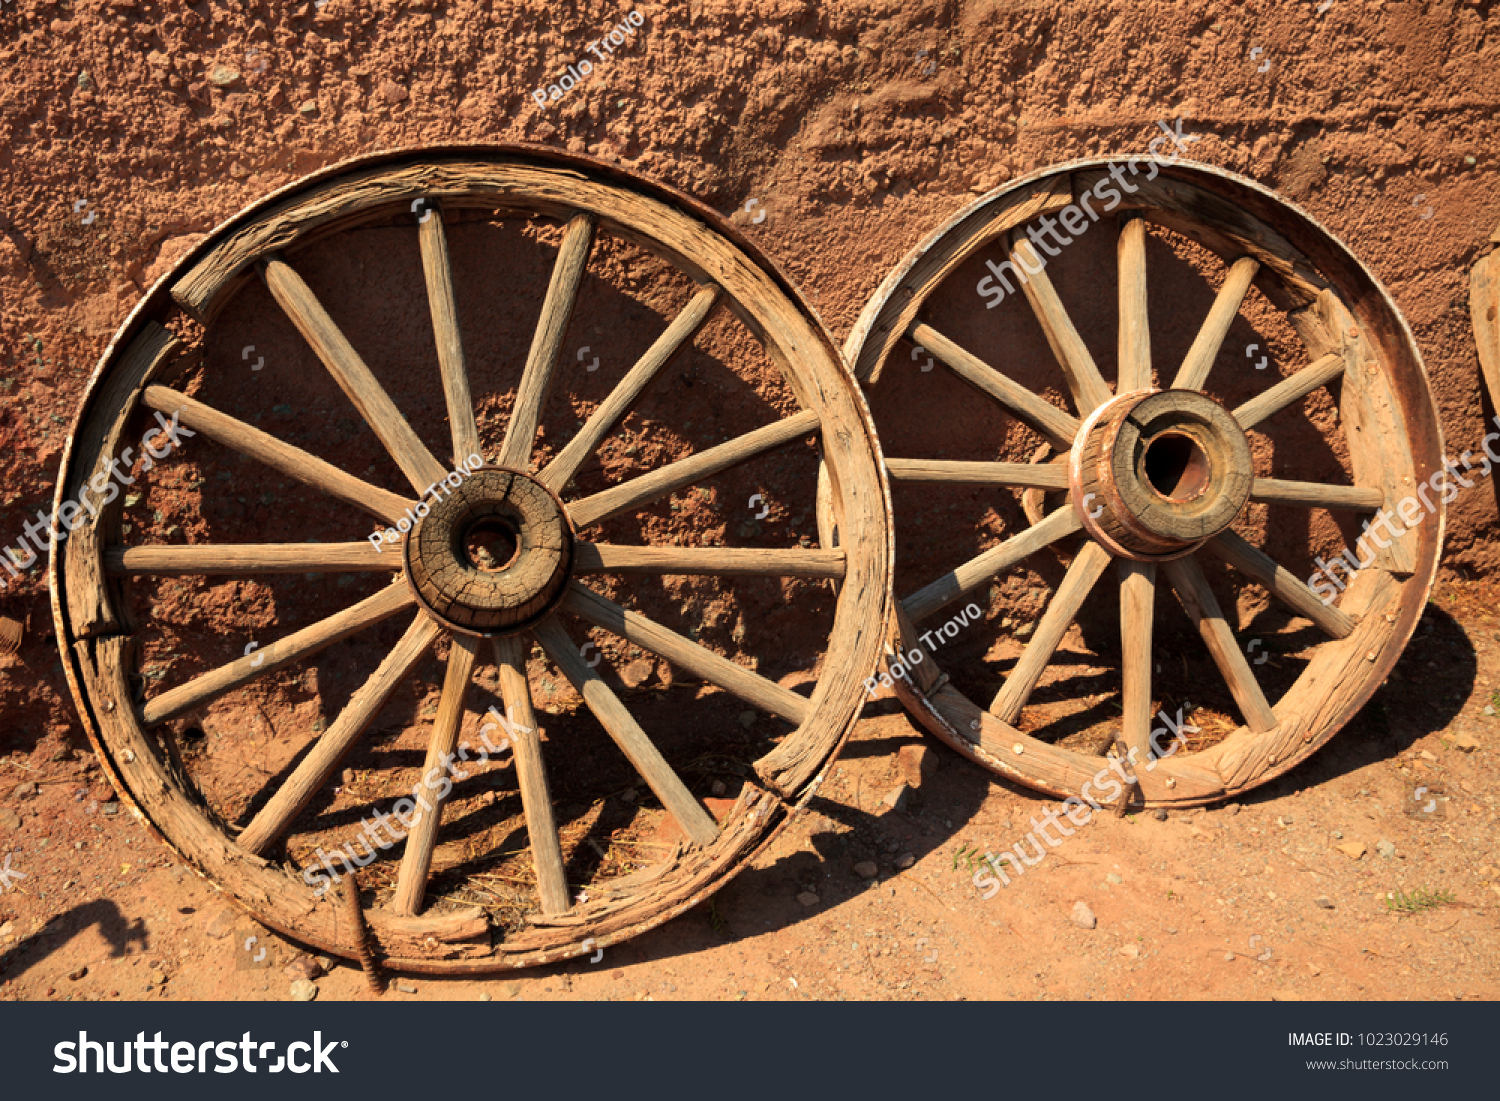 Calico, California / USA - August 23, 2015: An old wooden wheel in Calico Ghost Town, Calico, California, USA #1023029146